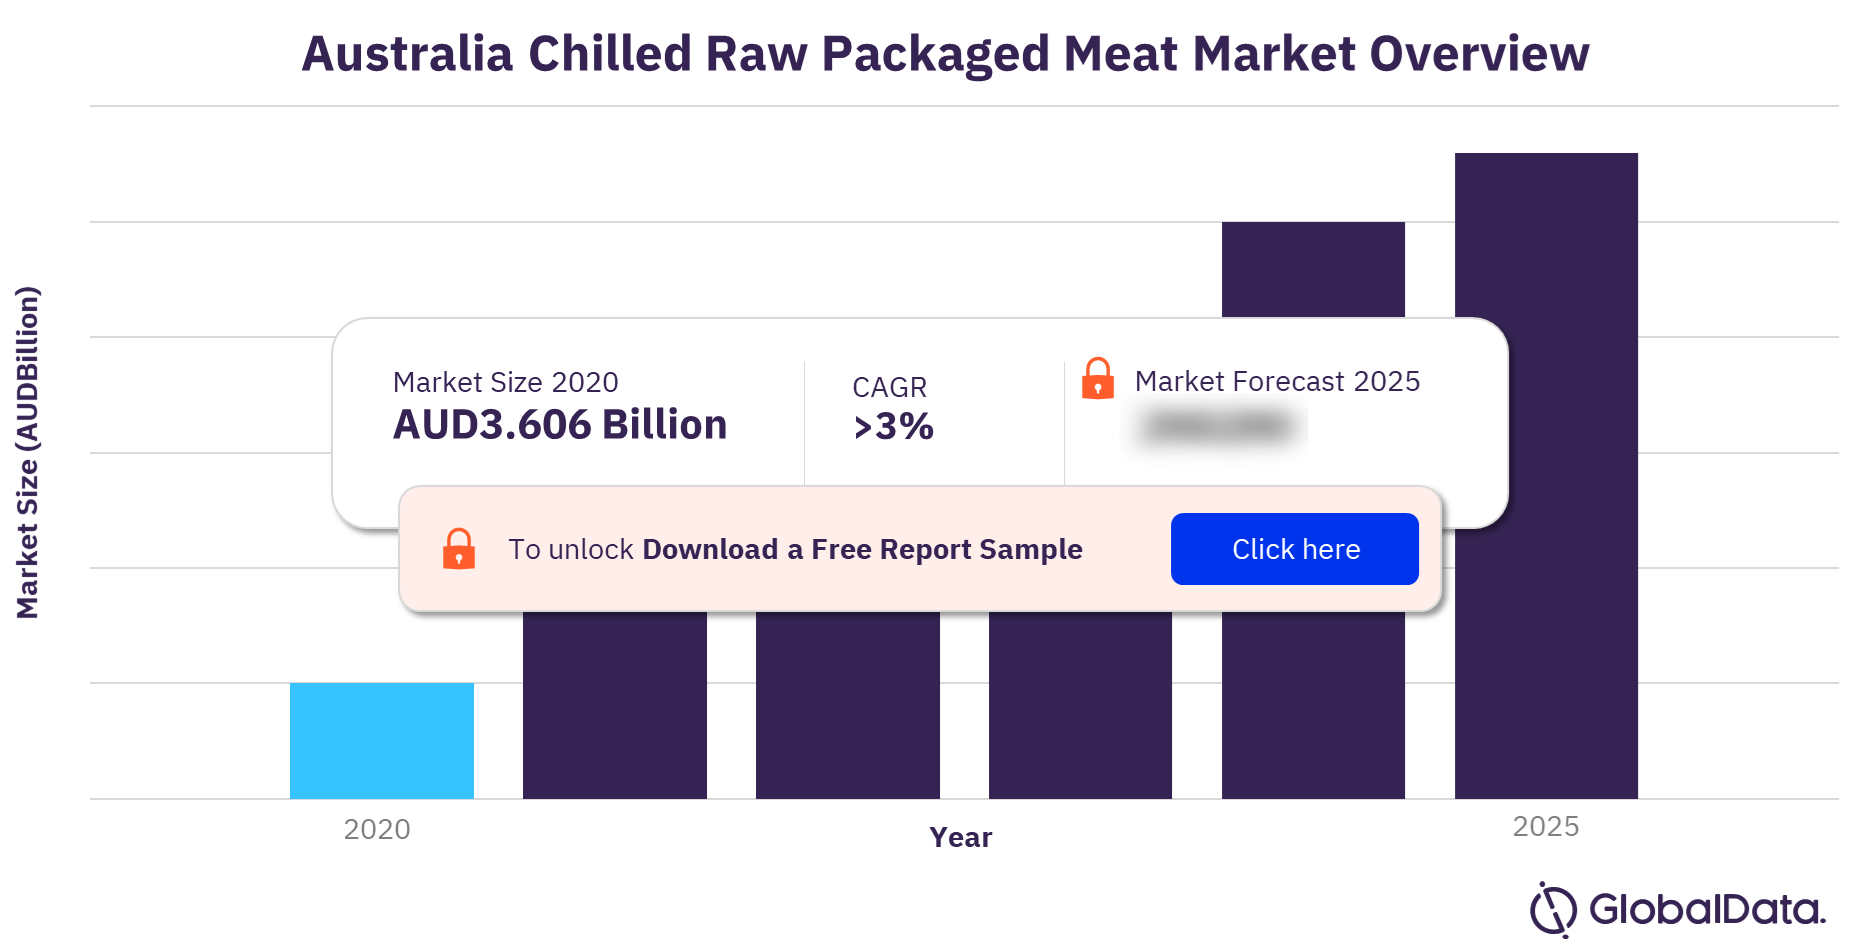 Australia chilled raw packaged meat market outlook